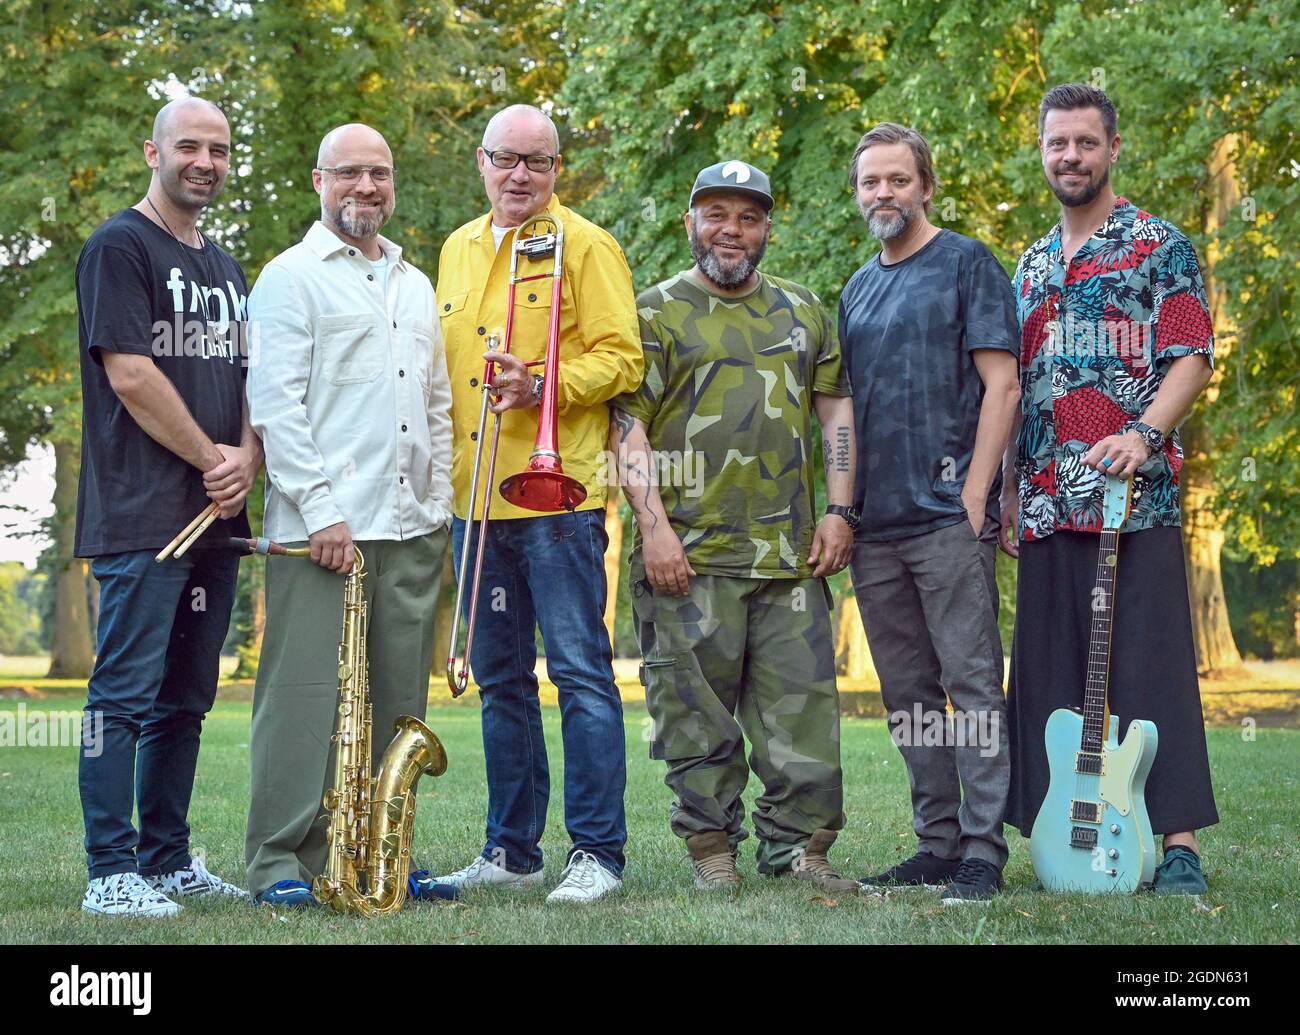 12 August 2021, Brandenburg, Neuhardenberg: Nils Landgren (3rd from left), Swedish trombonist and singer, with the musicians and singers of the band Funk Unit Robert Ikiz (l), Jonas Wall (2nd from left), Magnum Coltrane Price (3rd from right), Petter Bergander, (2nd from right) and Andy Pfeiler (r) taken at the side of the summer program of Schloss Neuhardenberg. The programme of the open-air event series 'Into the open air!' will run until 05.09.2021. Many different concerts, readings and talks take place under the large tent roof in the castle park. Photo: Patrick Pleul/dpa-Zentralbild/ZB Stock Photo